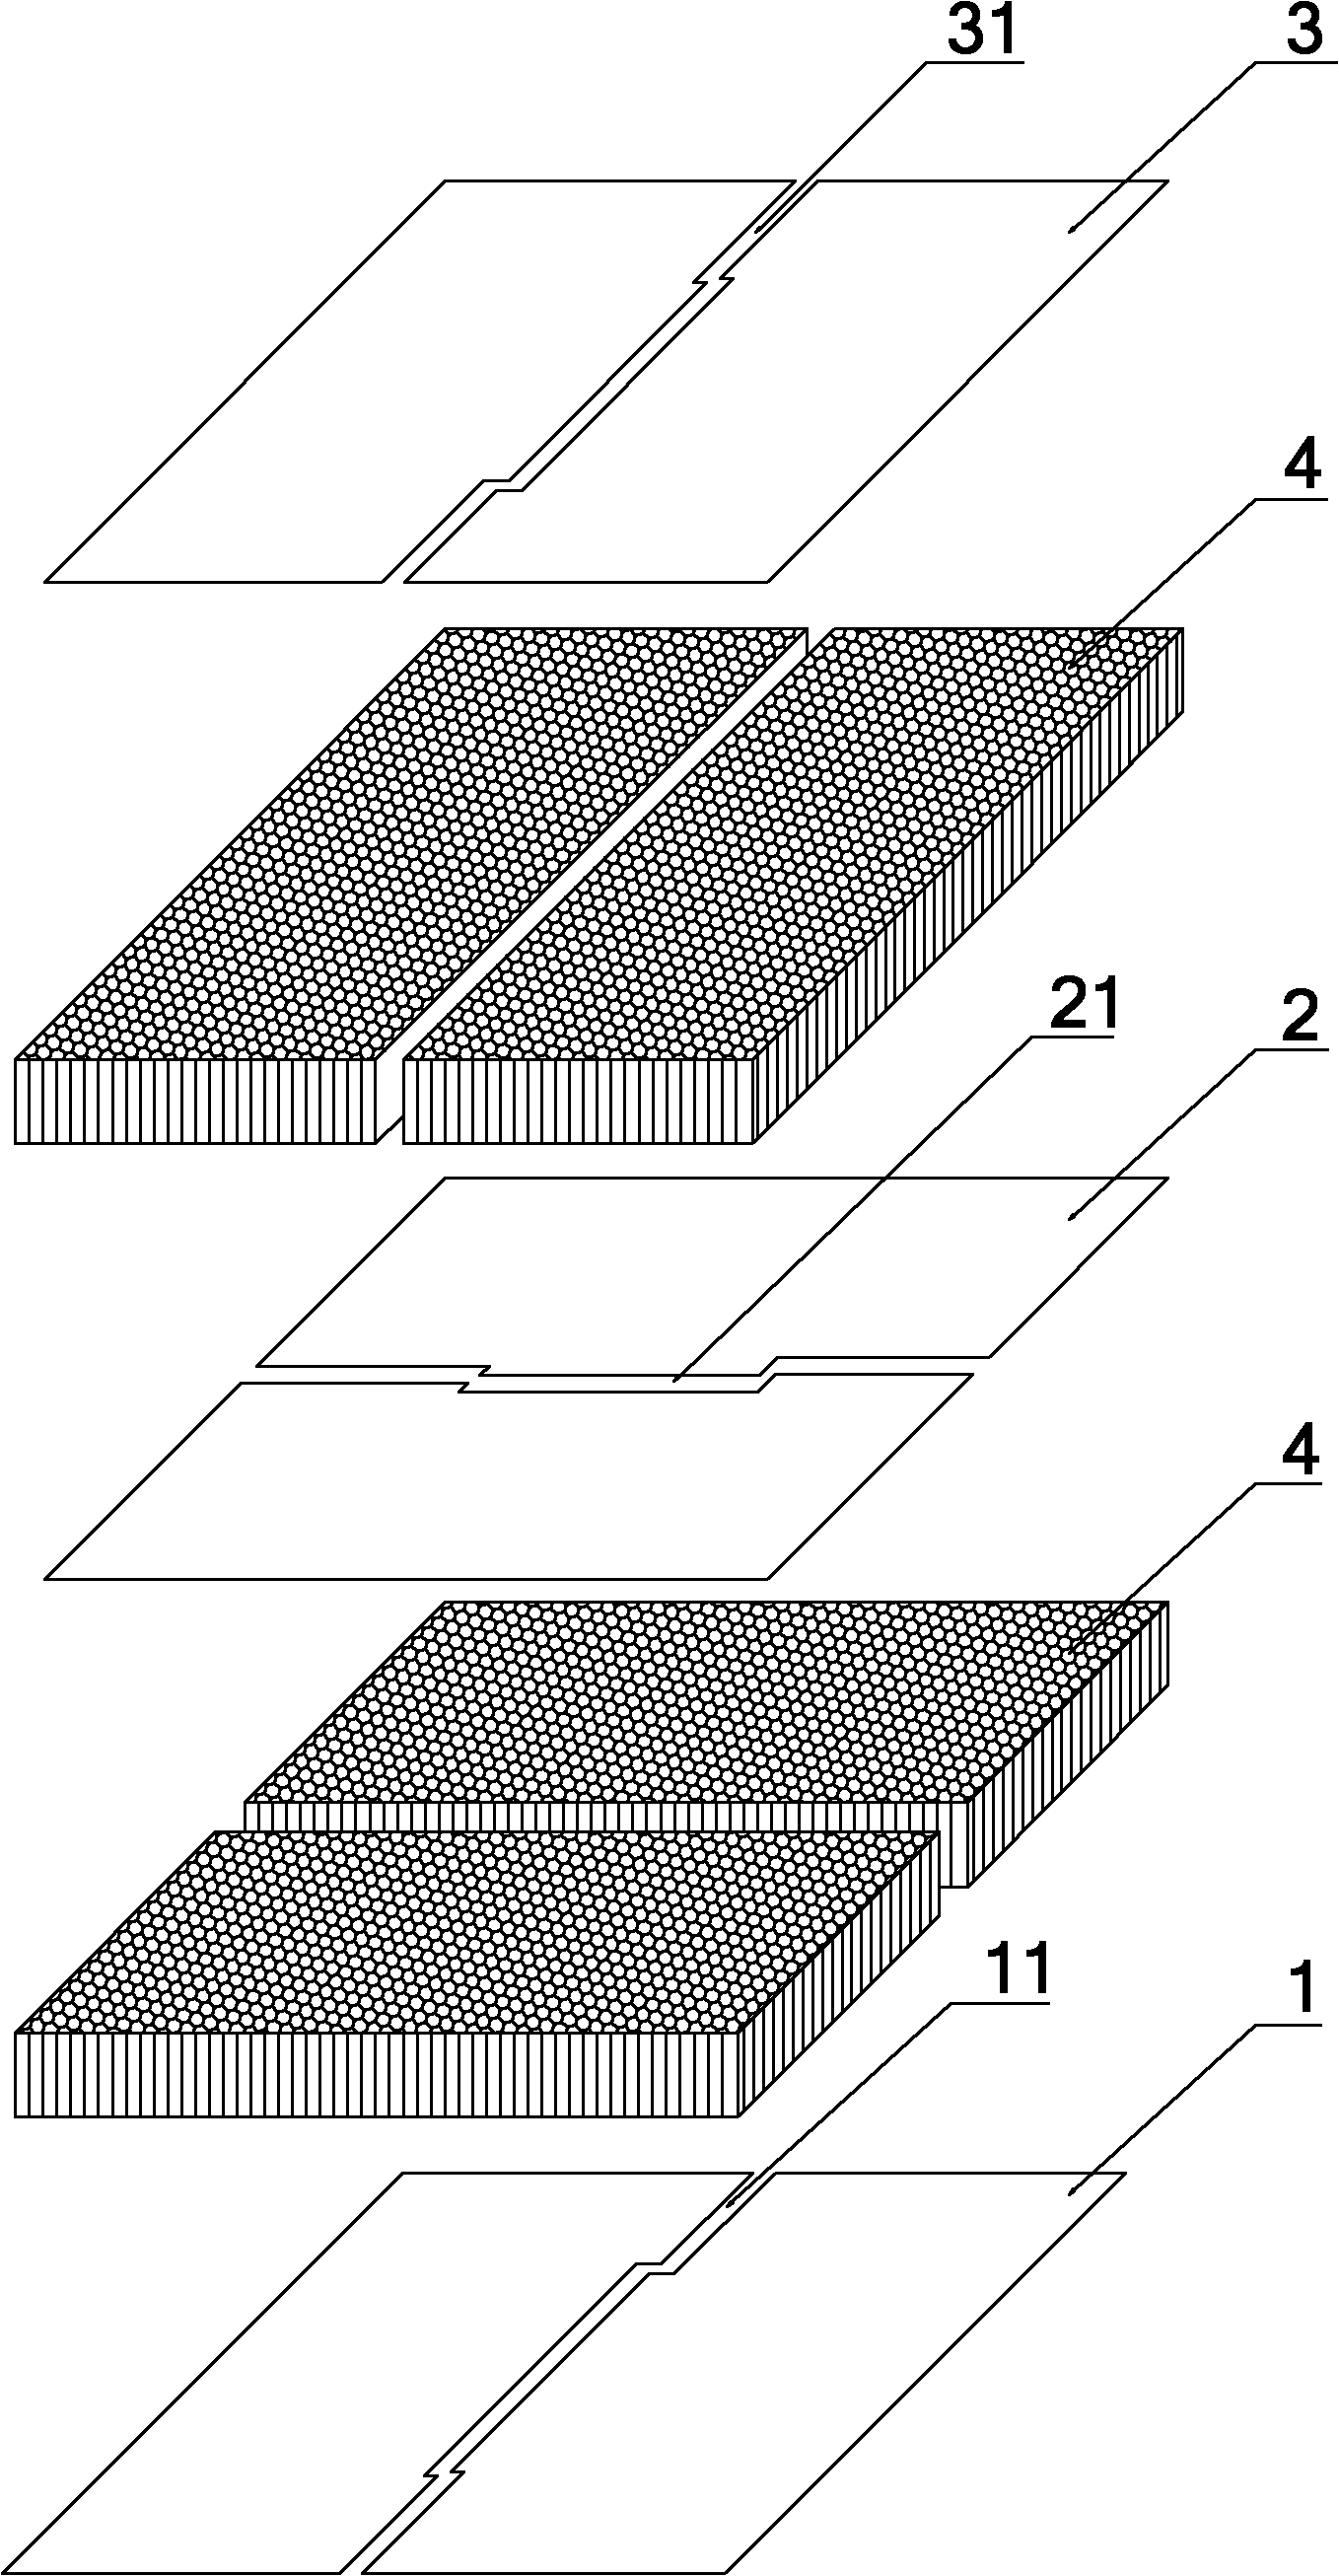 Splicing method for reflection panel in honeycomb sandwich structure